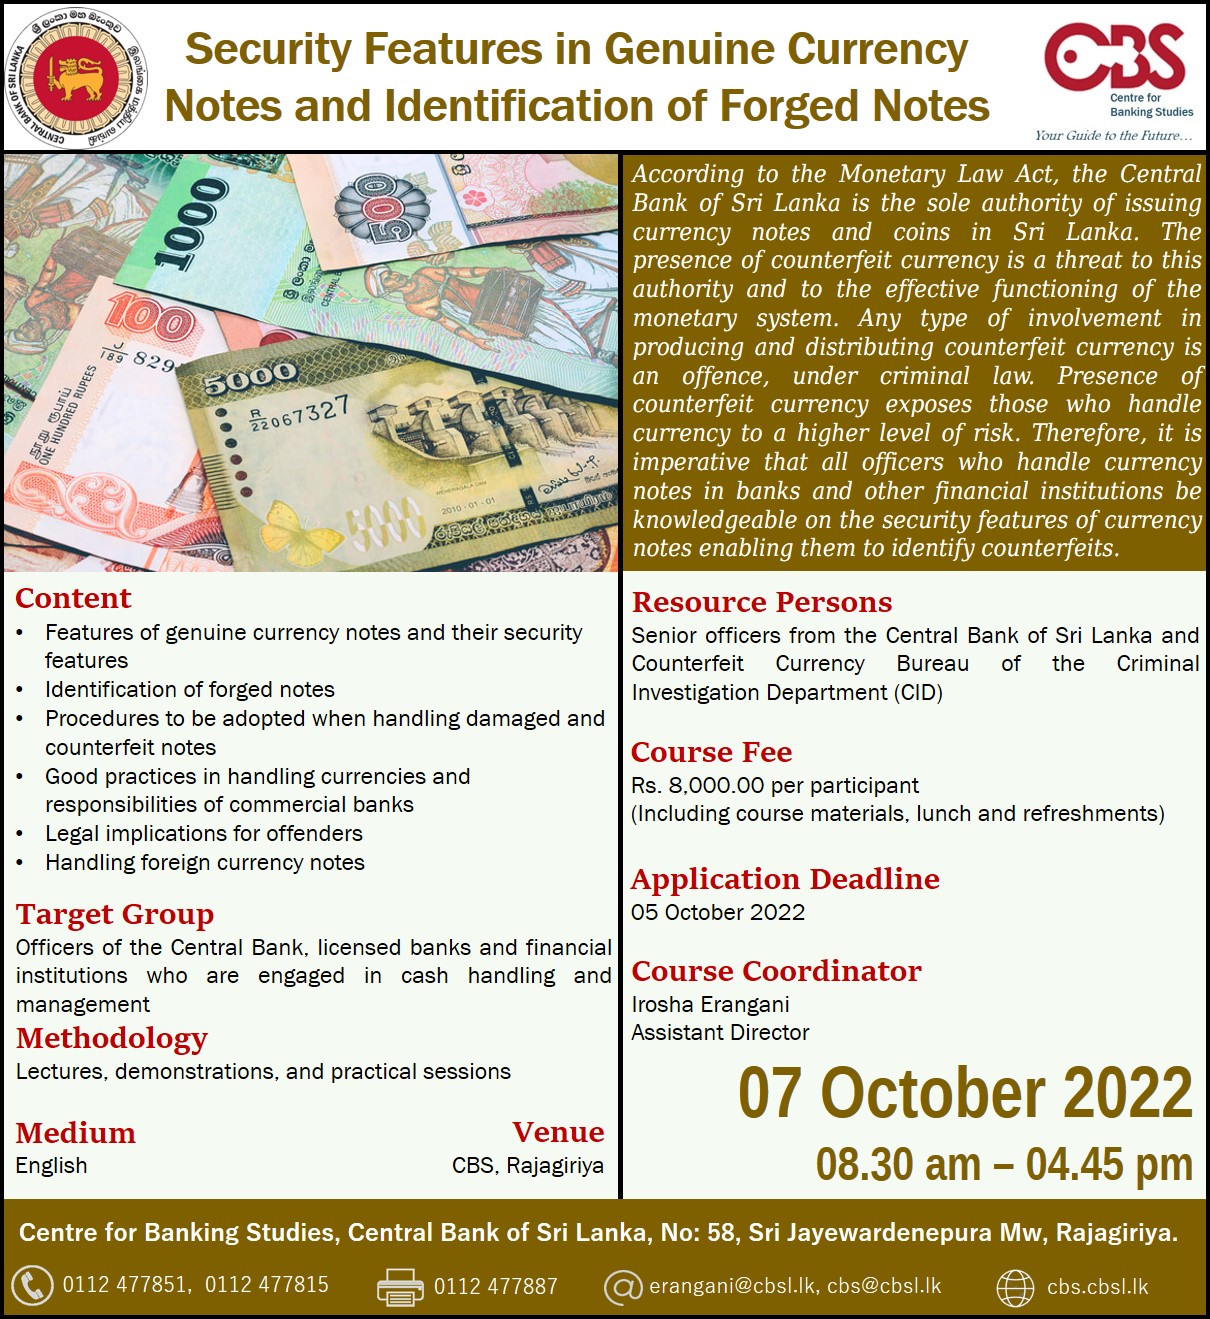 Security Features in Genuine Currency Notes and Identification of Forged Notes